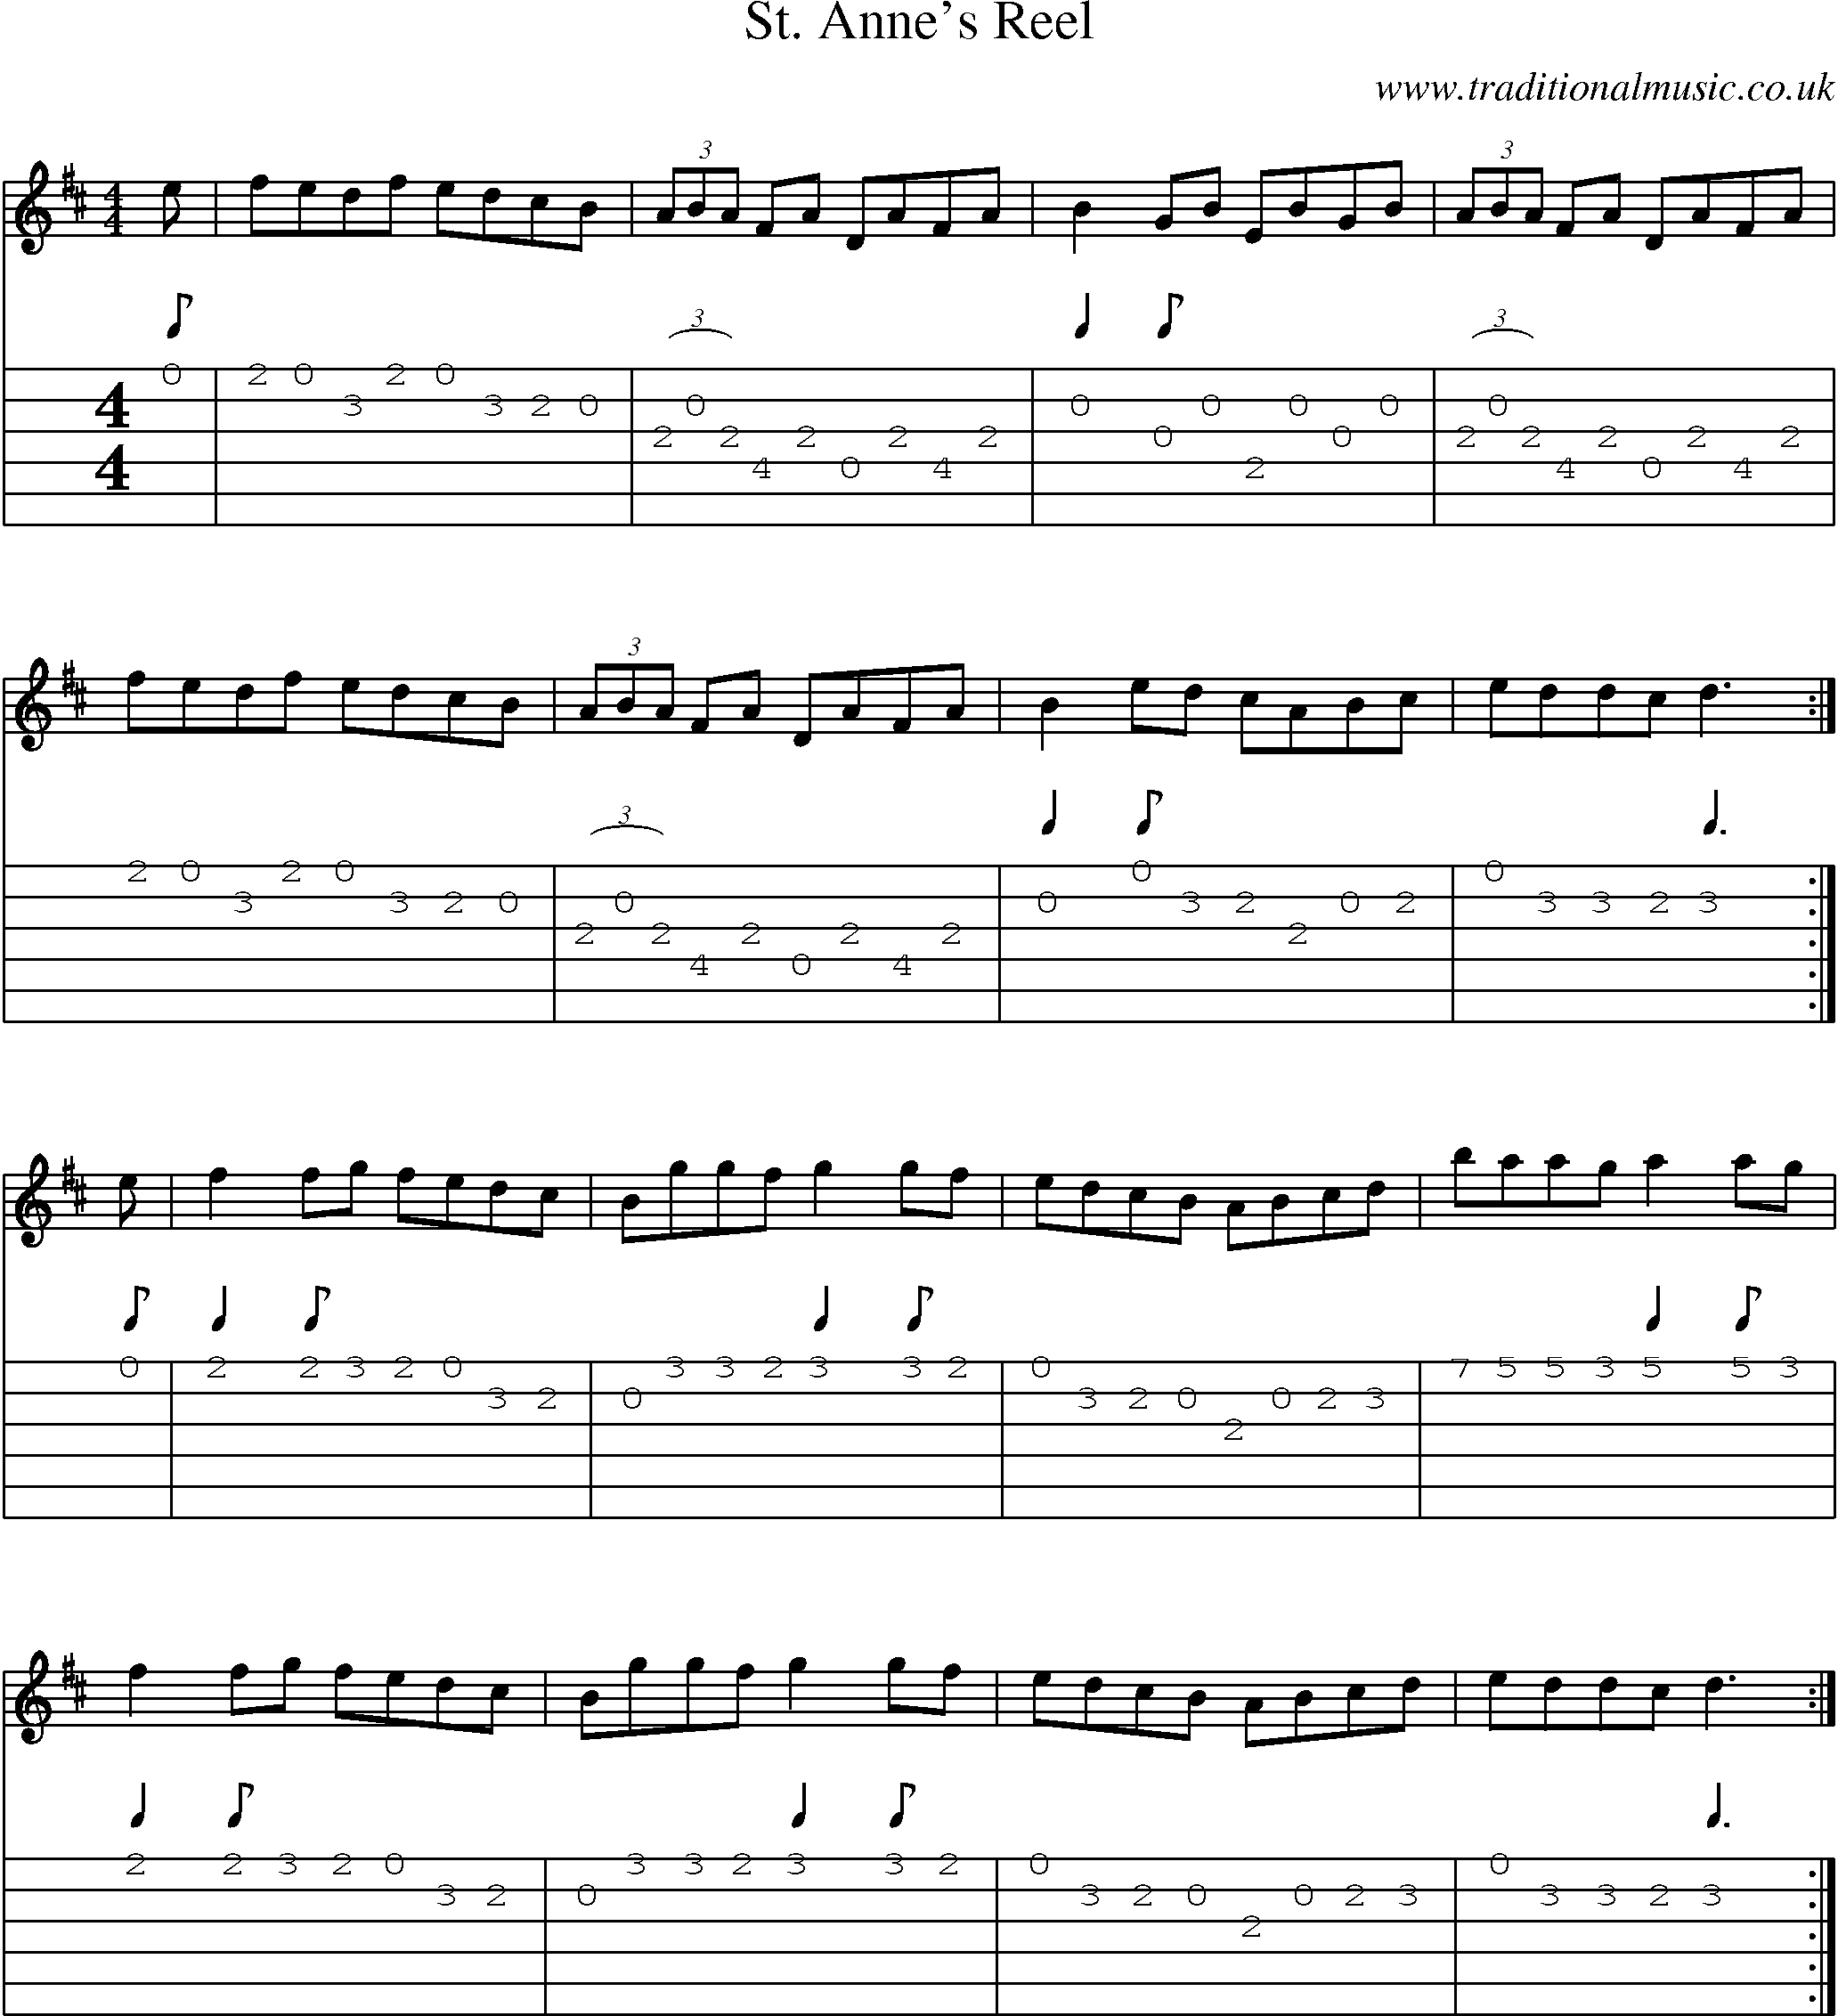 Music Score and Guitar Tabs for St Annes Reel